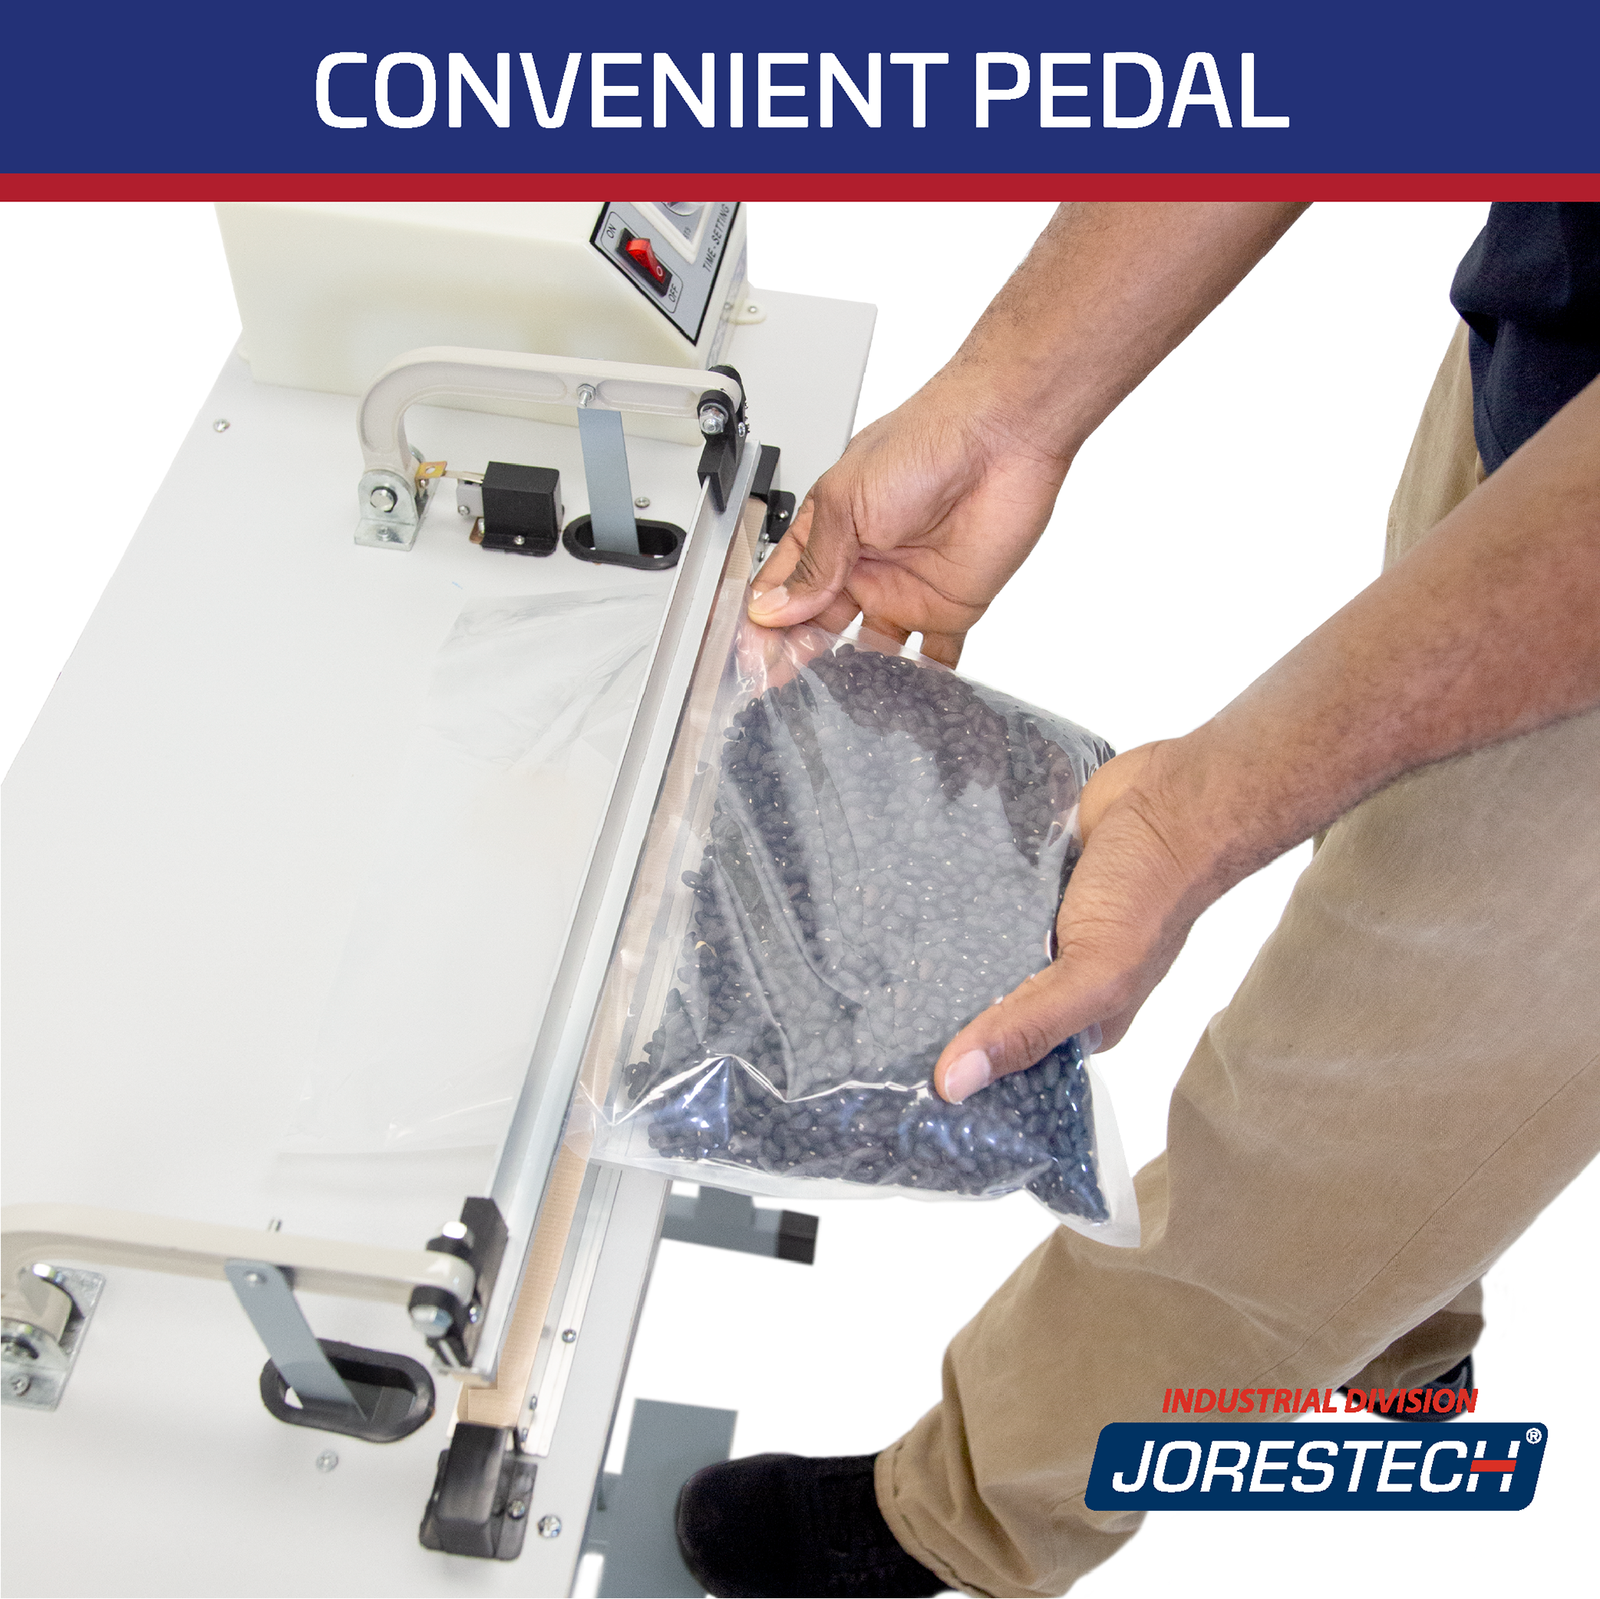 Titled reds: “Convenient Pedal” shows a bag full of black beans being sealed with the Jorestech impulse foot sealer. 